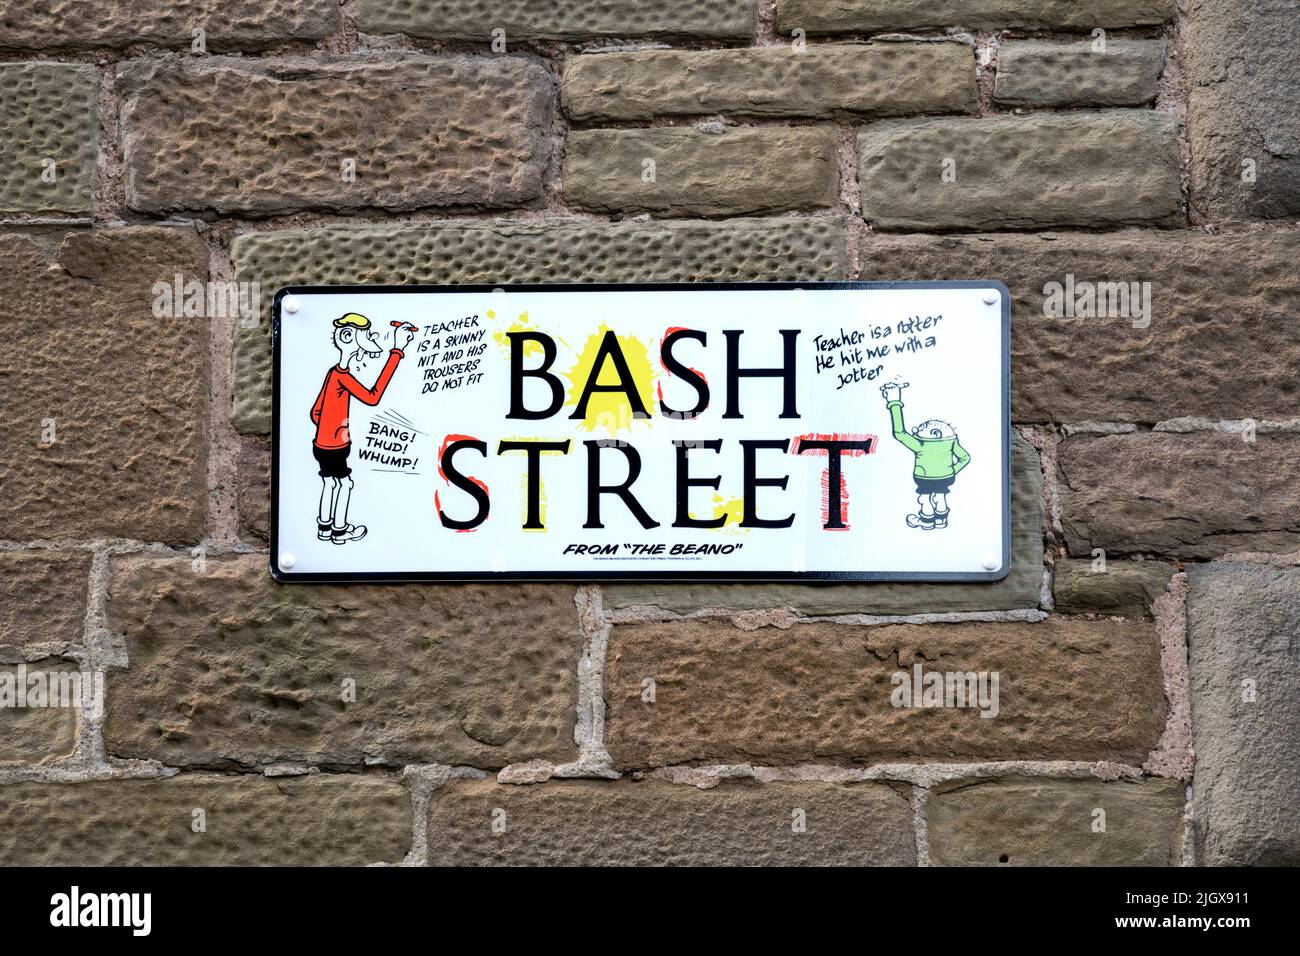 Street name sign for Bash Street in Dundee. Featuring the Bash Street Kids from the Beano comic produced in Dundee by D. C. Thomson. Stock Photo